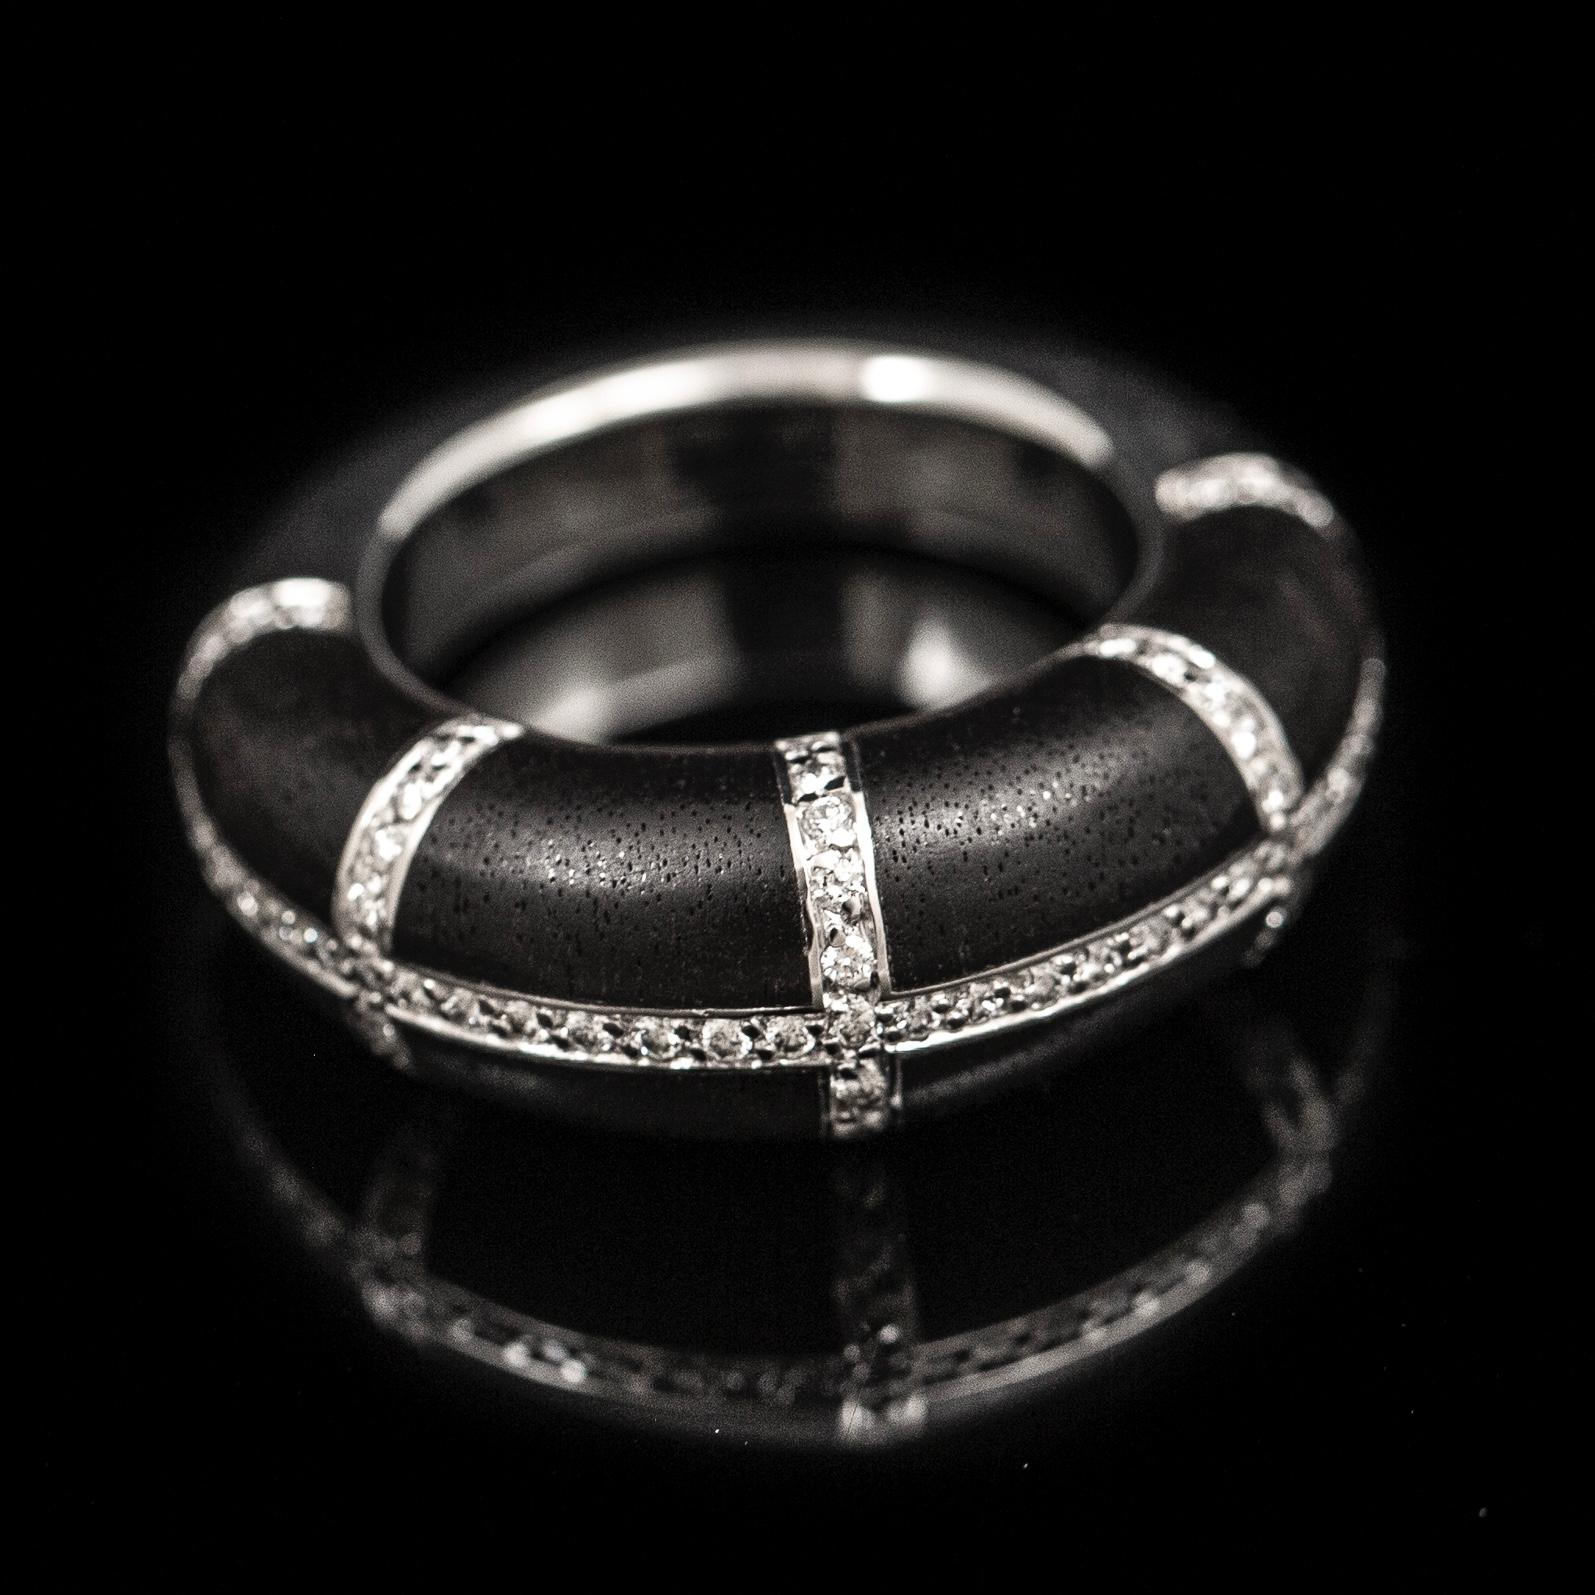 Chaumet “Anneau” diamond and ebony cocktail ring in 18kt white gold, French, vintage from the late 20th century. Of a bombe design, the top part of this ring is composed by ebony plaques divided in eight sections by lines of round brilliant-cut